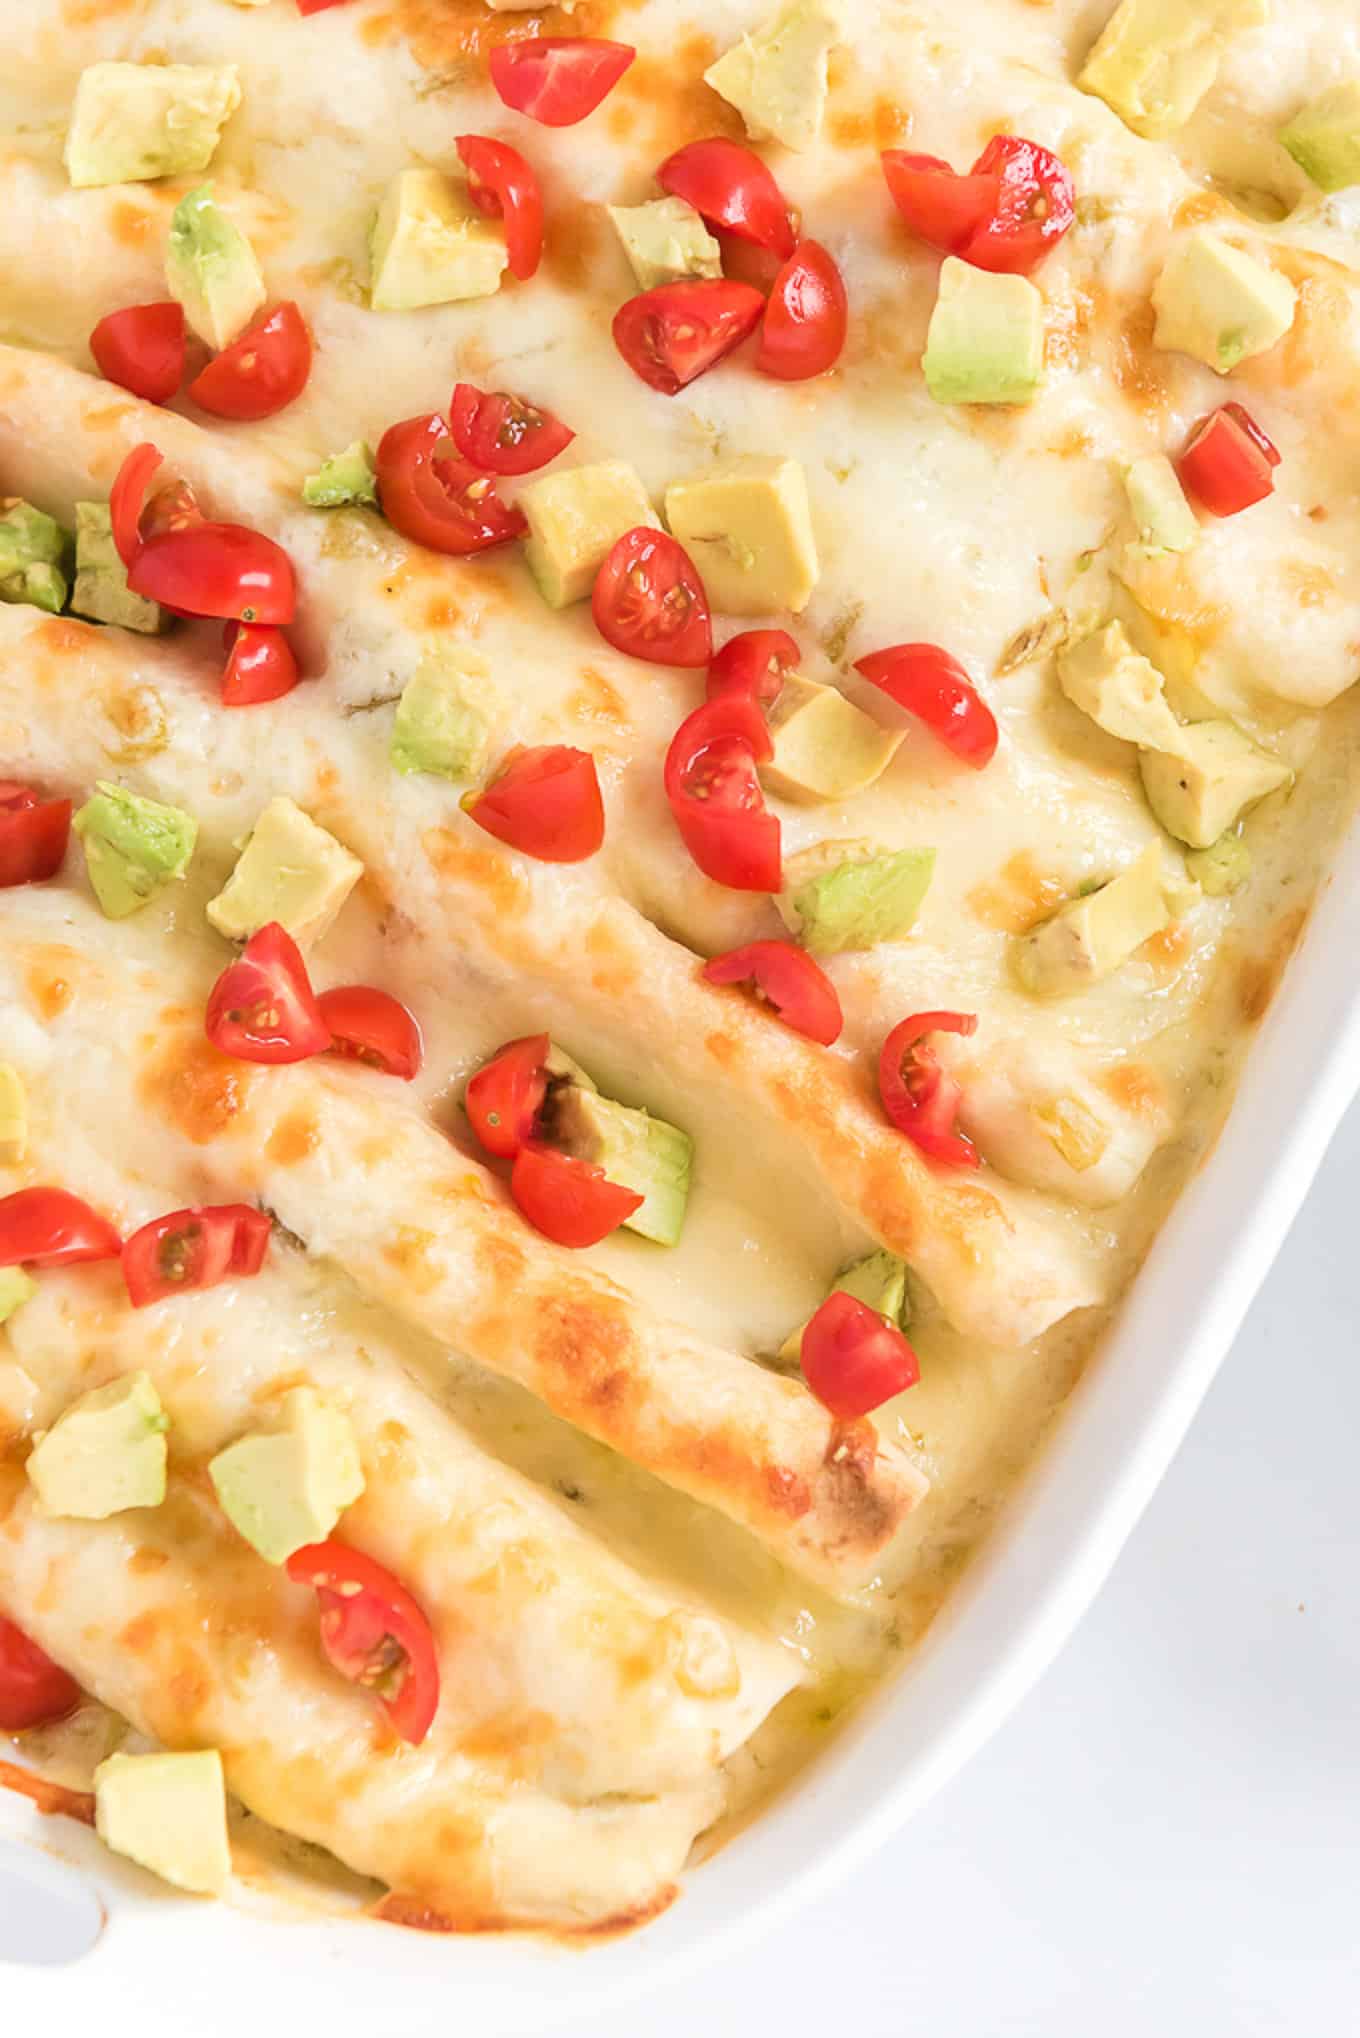 Rotisserie chicken enchiladas topped with melted cheese, tomatoes, and avocado in a baking dish.